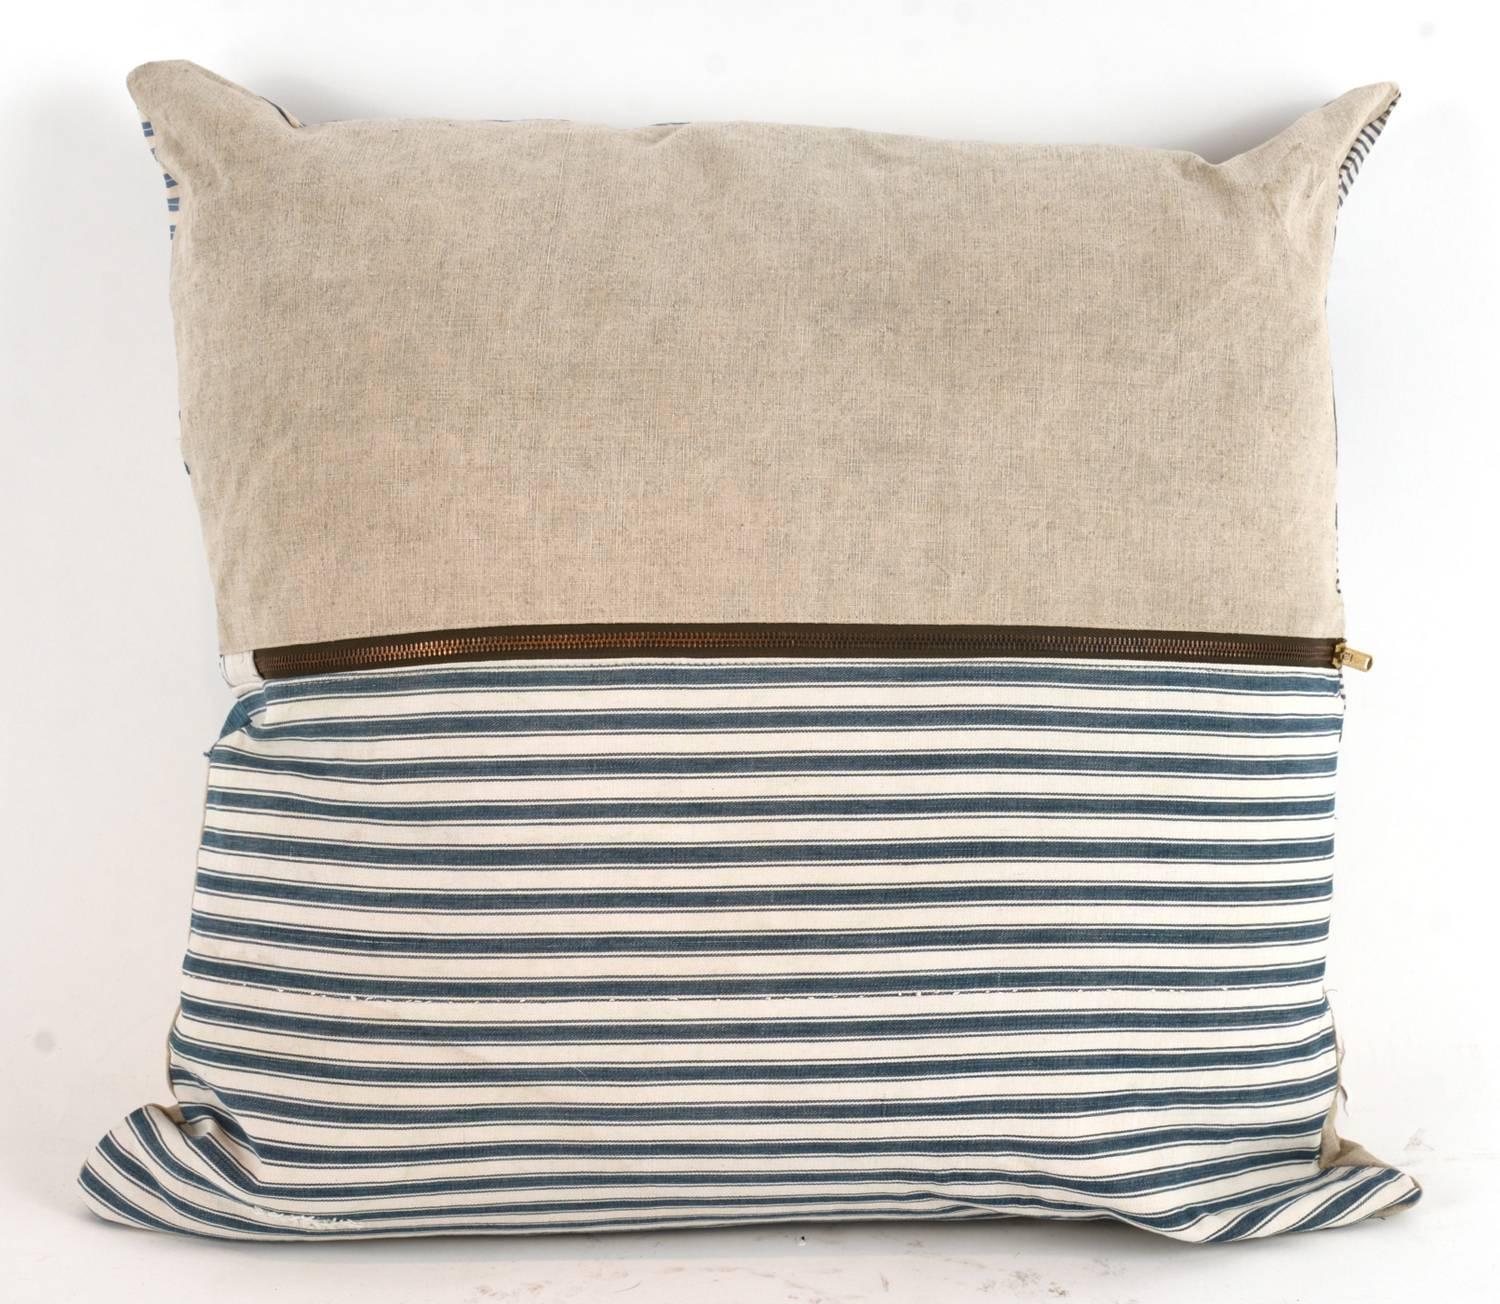 One of a king large-scale pillow constructed out of vintage textiles including canvas, drop cloth and sailcloth. All materials have been thoroughly laundered and are machine washable down inserts give these a wonderful plush relaxed feel and